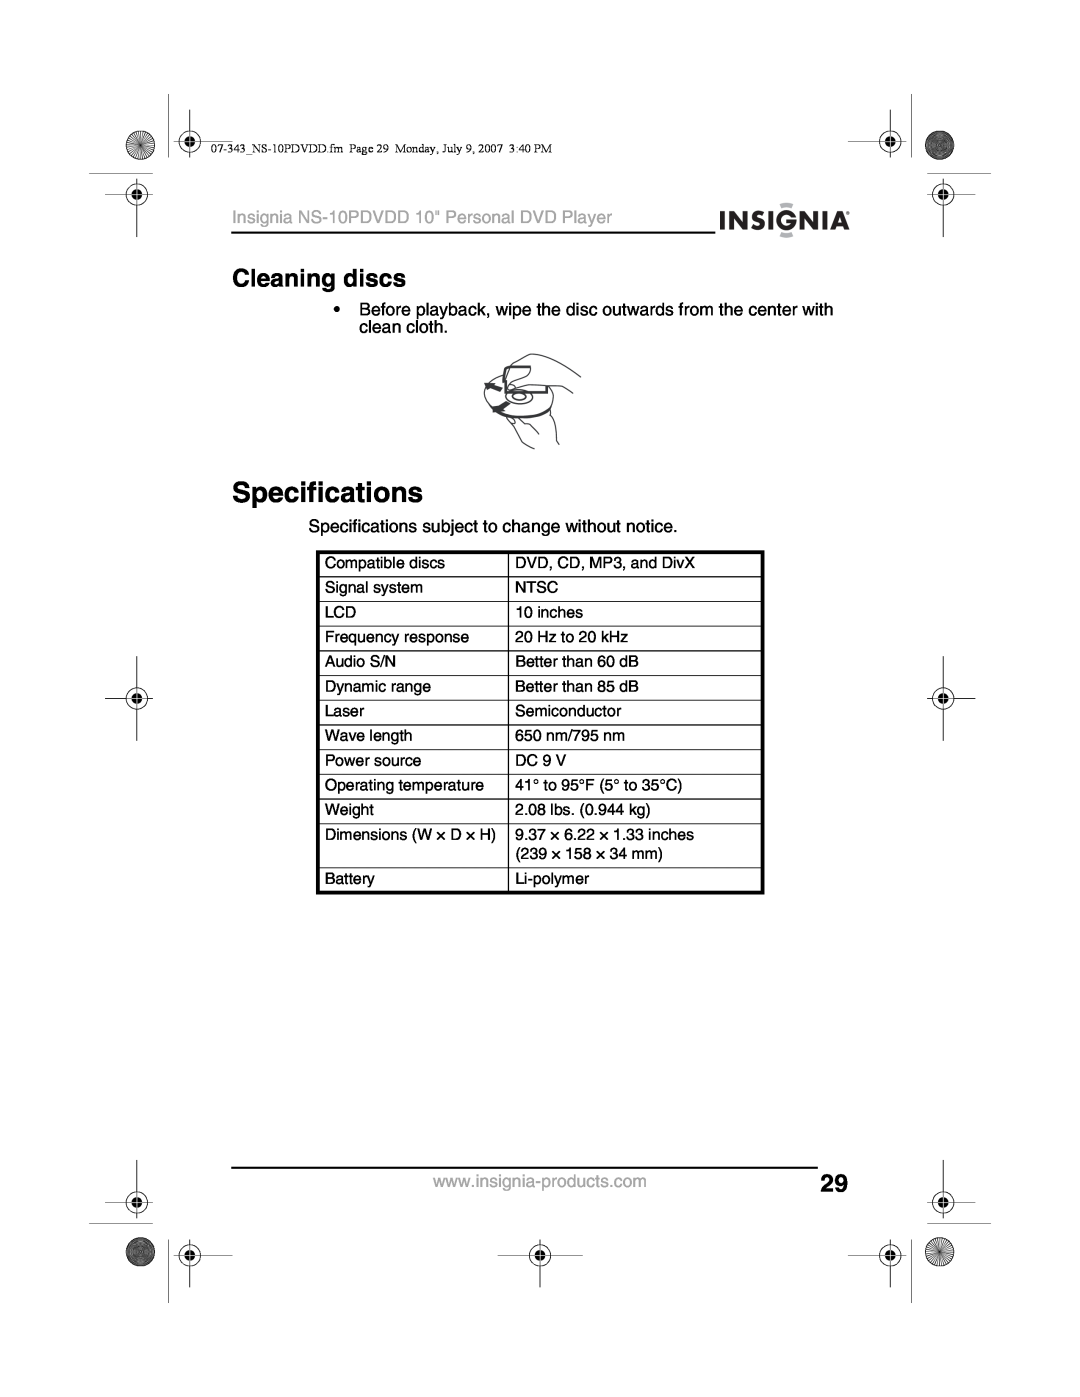 Insignia manual Specifications, Cleaning discs, Insignia NS-10PDVDD 10 Personal DVD Player 